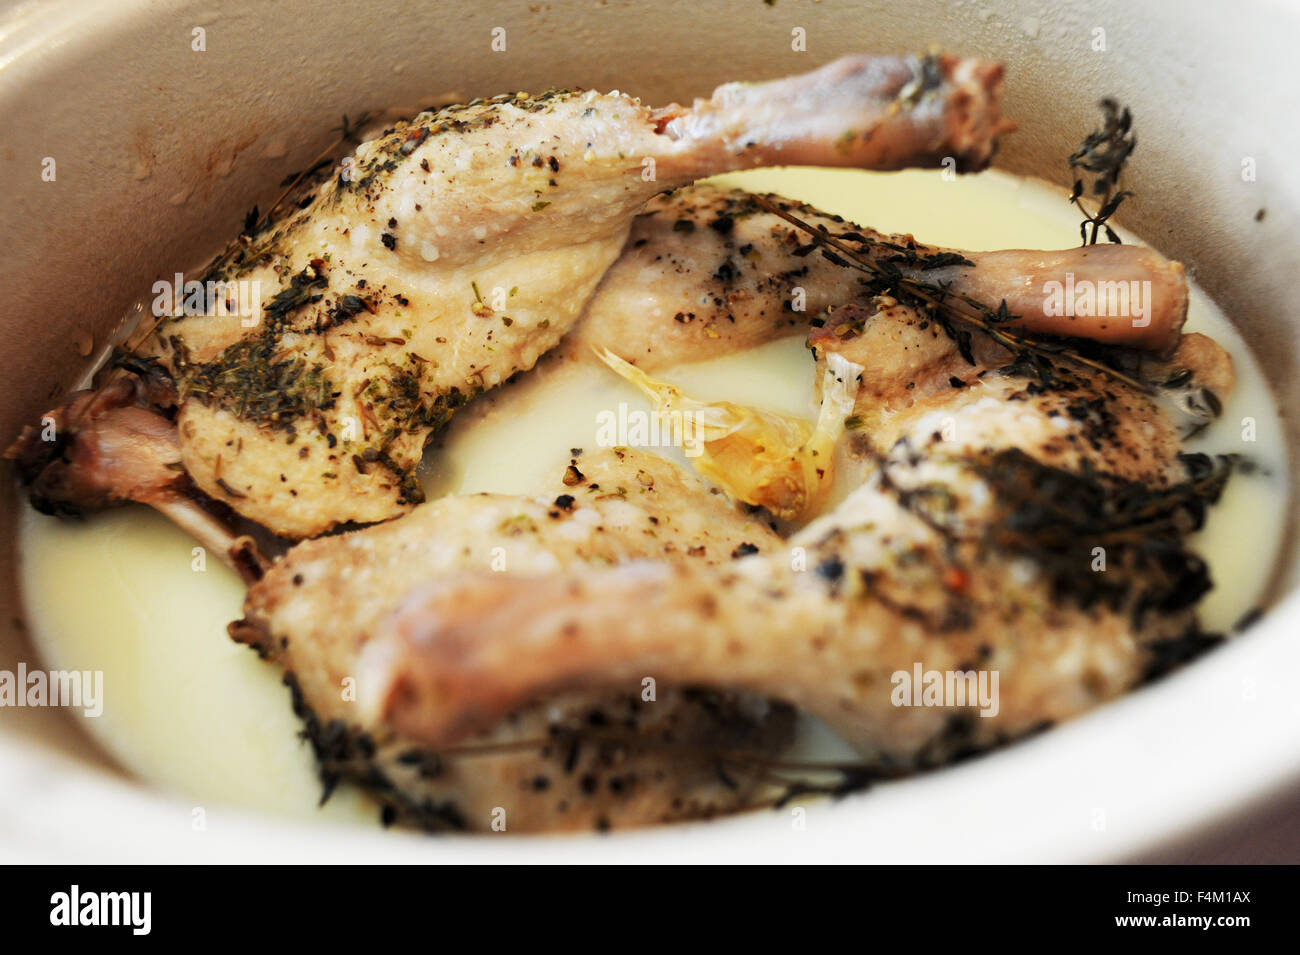 Homemade confit of duck legs cooked in duck fat Stock Photo